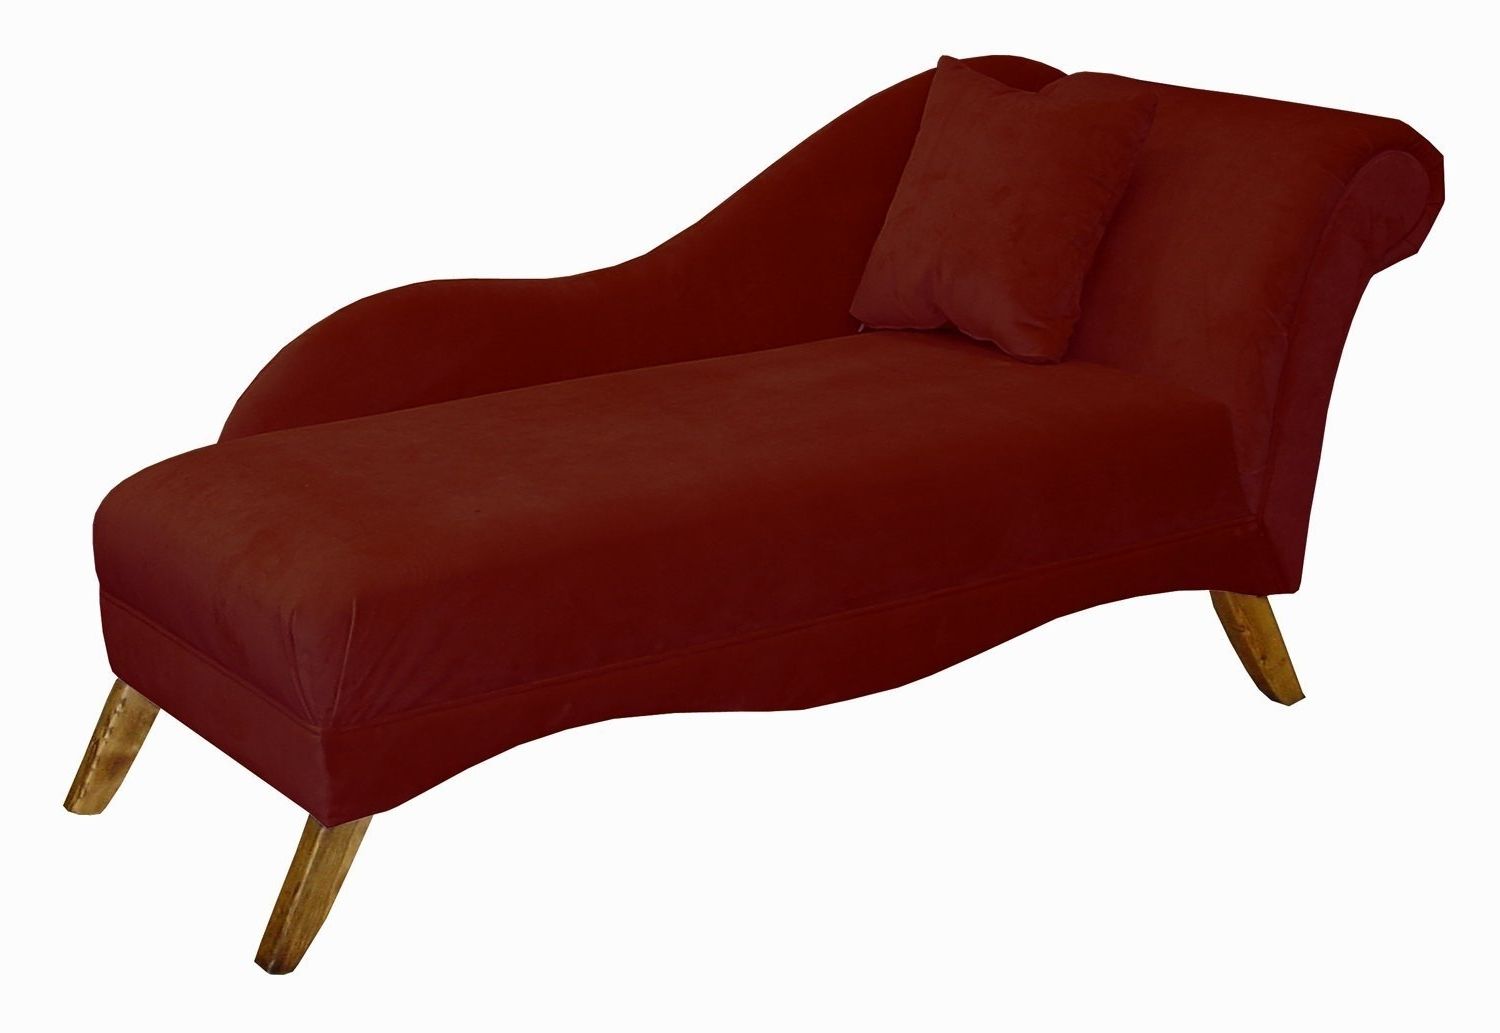 Skyline Chaise Lounges Within Latest Amazon: Isabella Single Arm Chaise Loungeskyline Furniture (View 8 of 15)